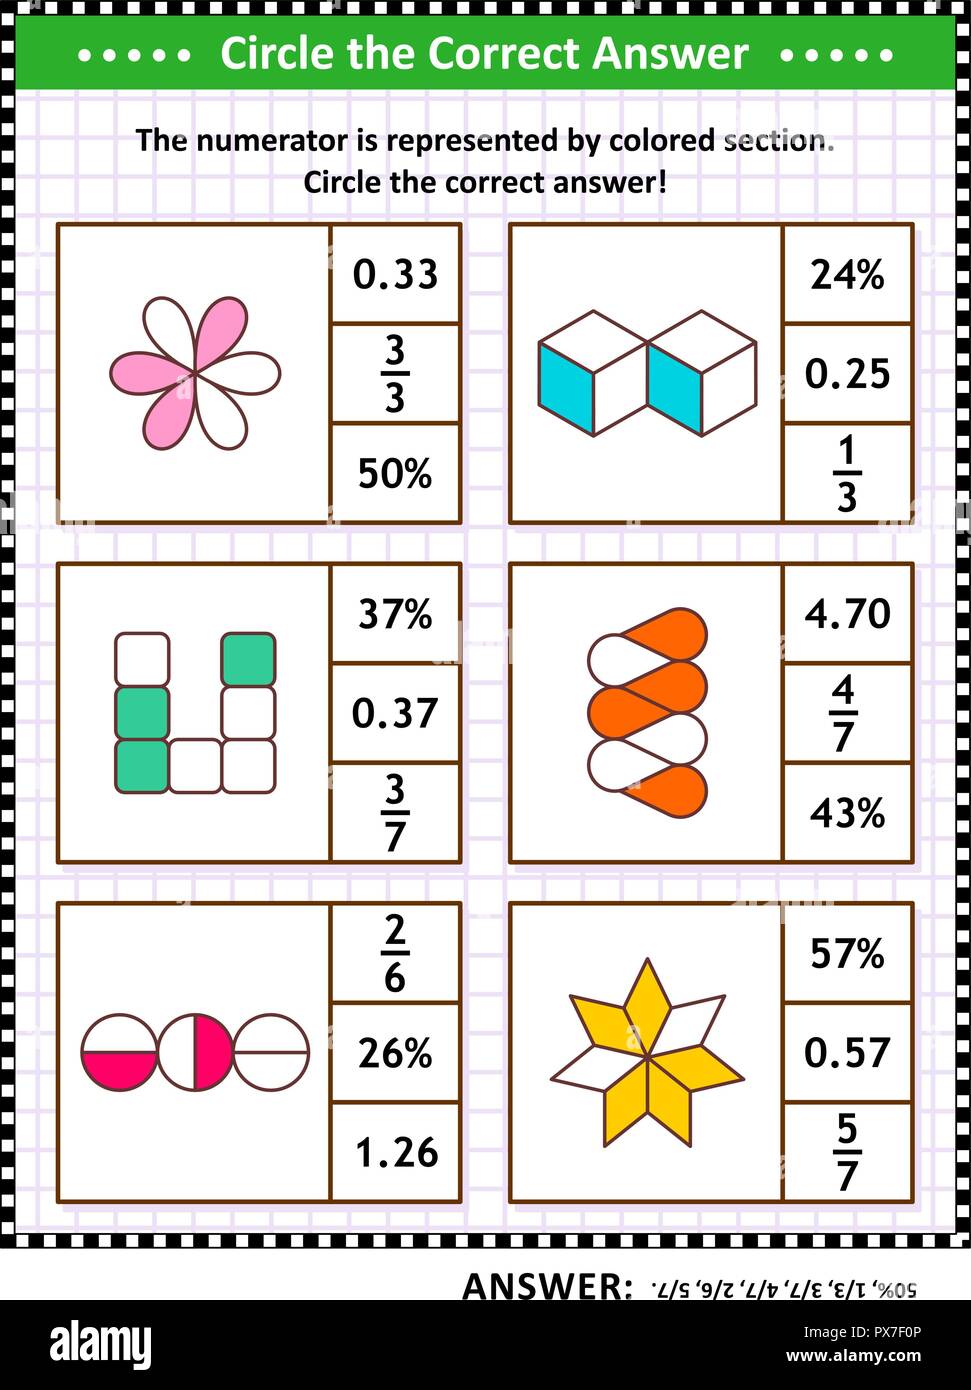 Math skills training visual puzzle or worksheet. Circle the correct answer. Find the number equivalent for each pictorial fraction representation. Answer included. Stock Vector